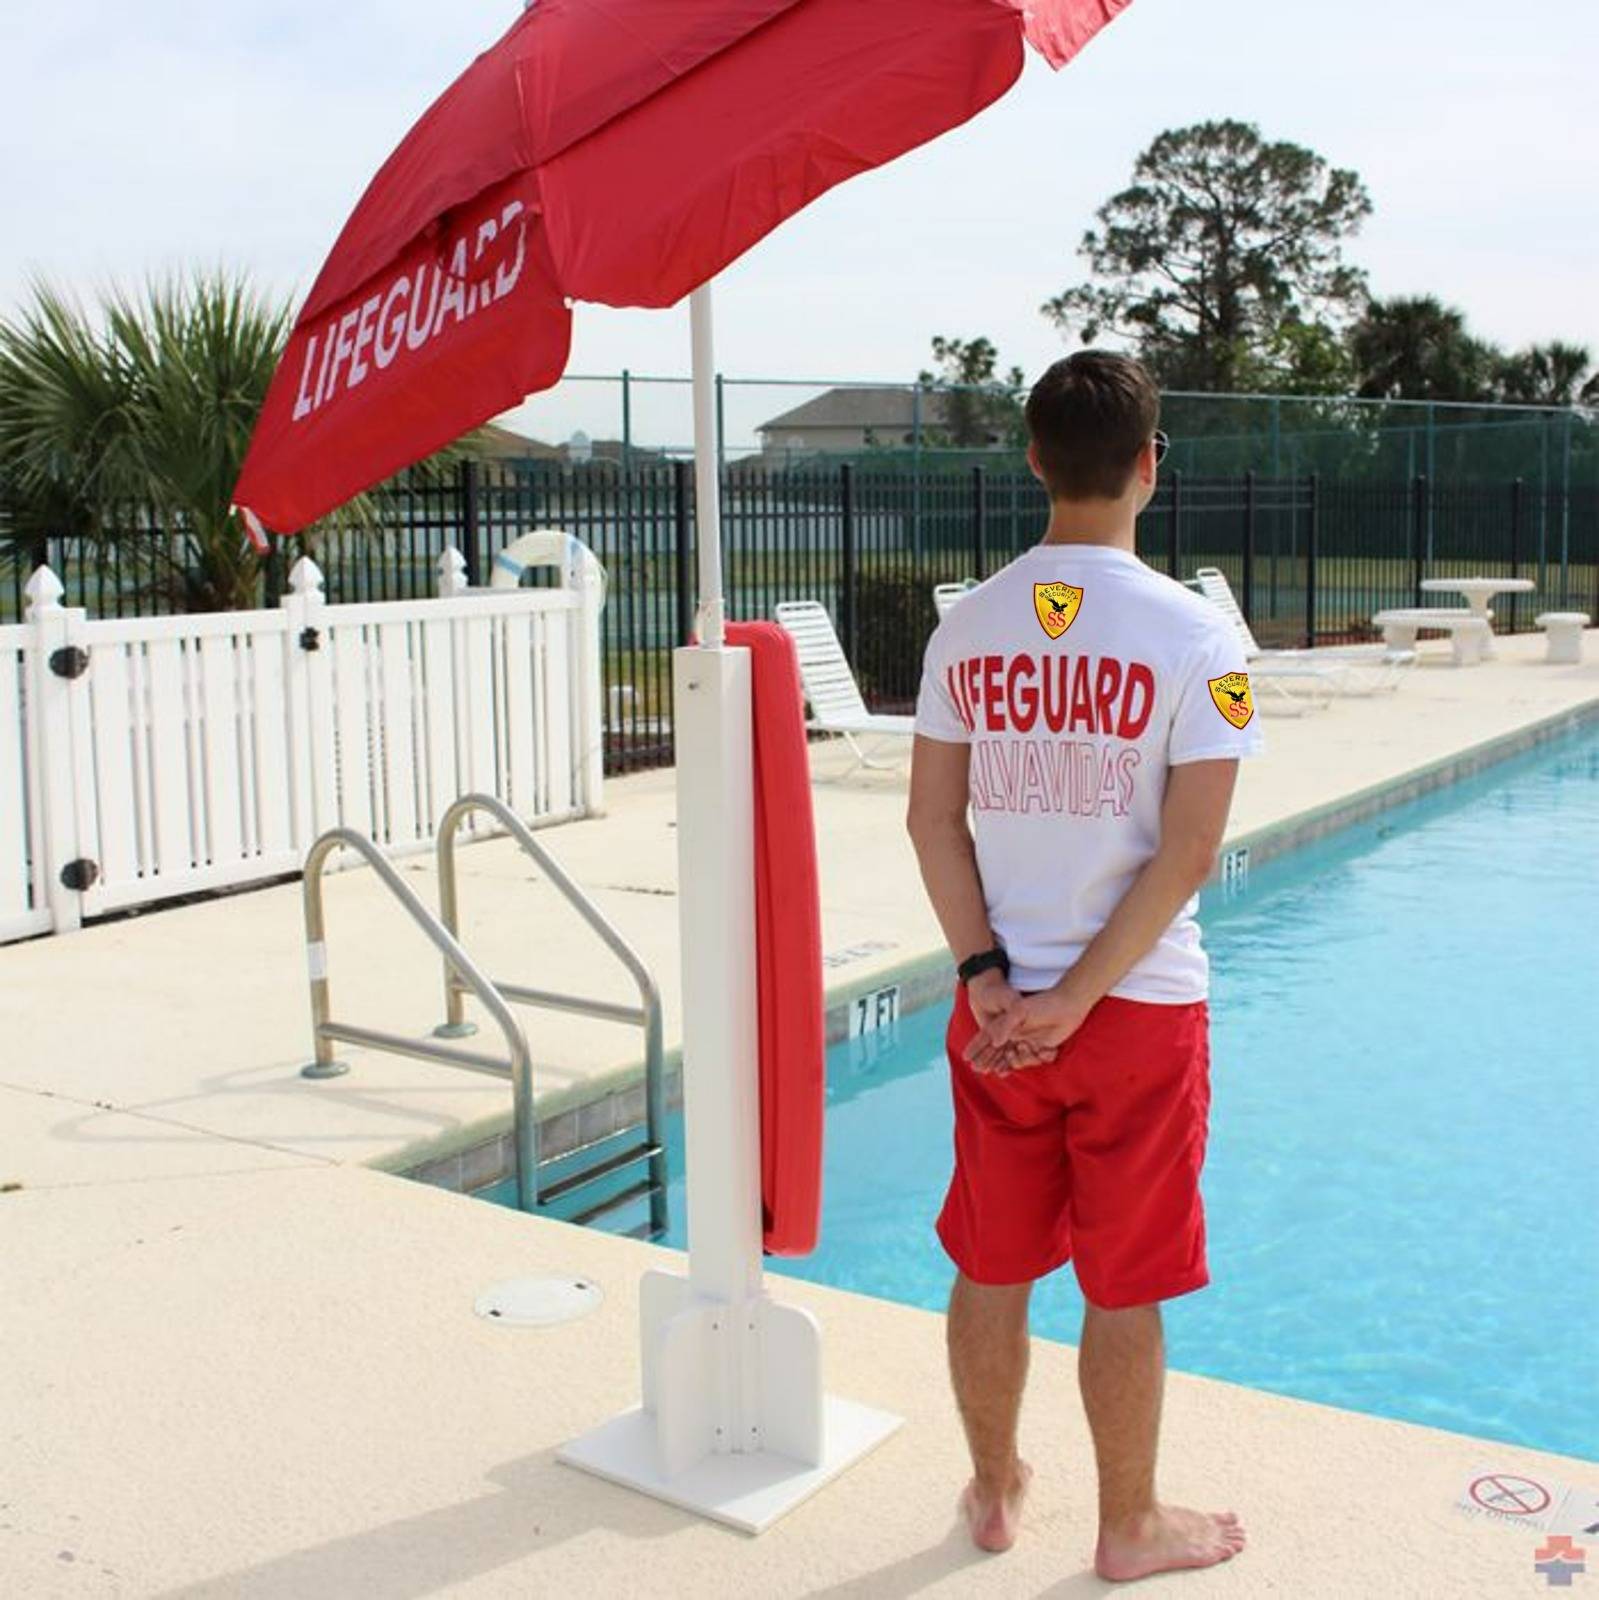 Event Security Services: pool lifeguard